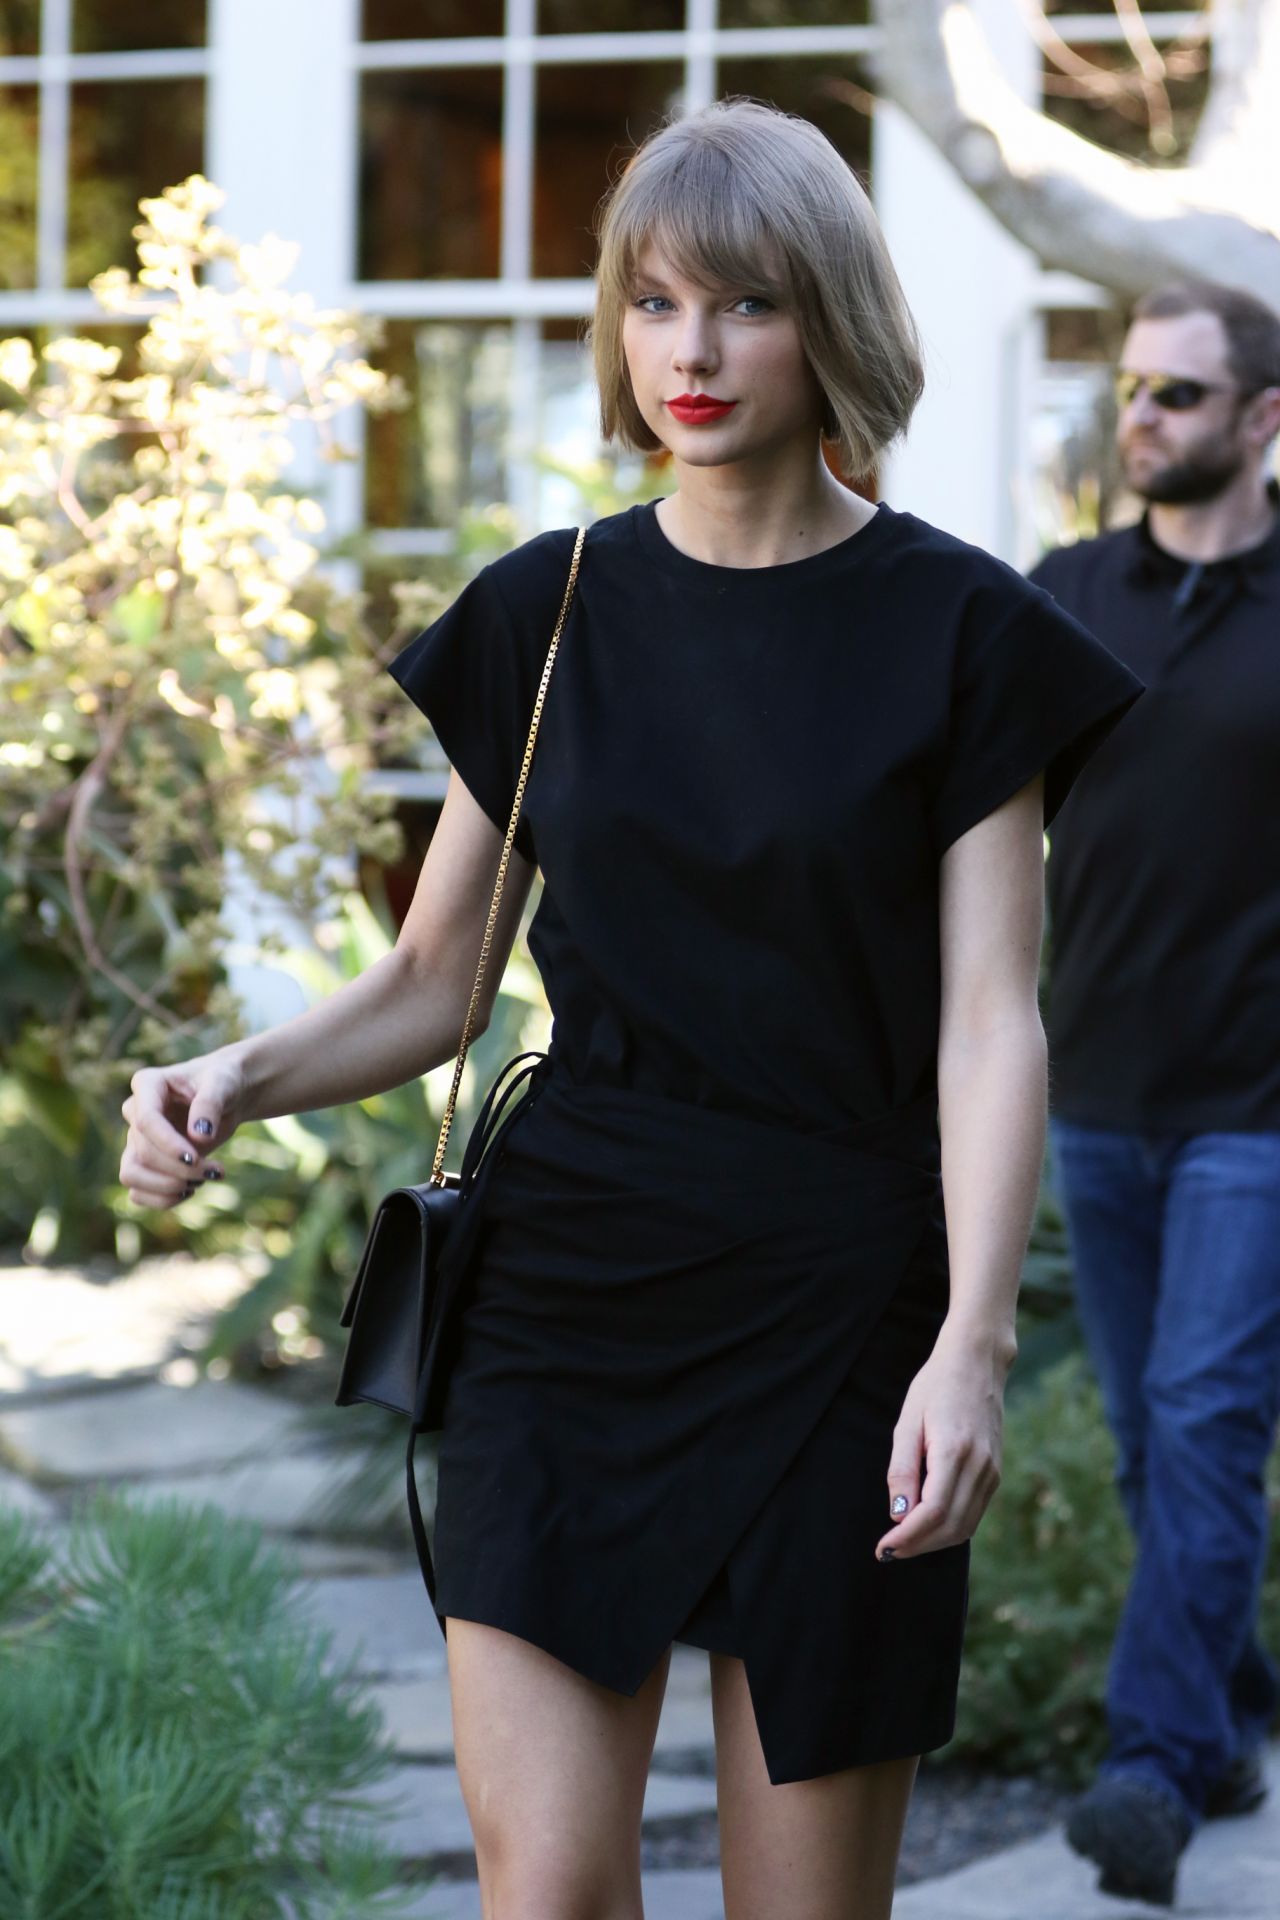 Taylor Swift in Mini Dress - Shopping in West Hollywood 2/24/20161280 x 1920